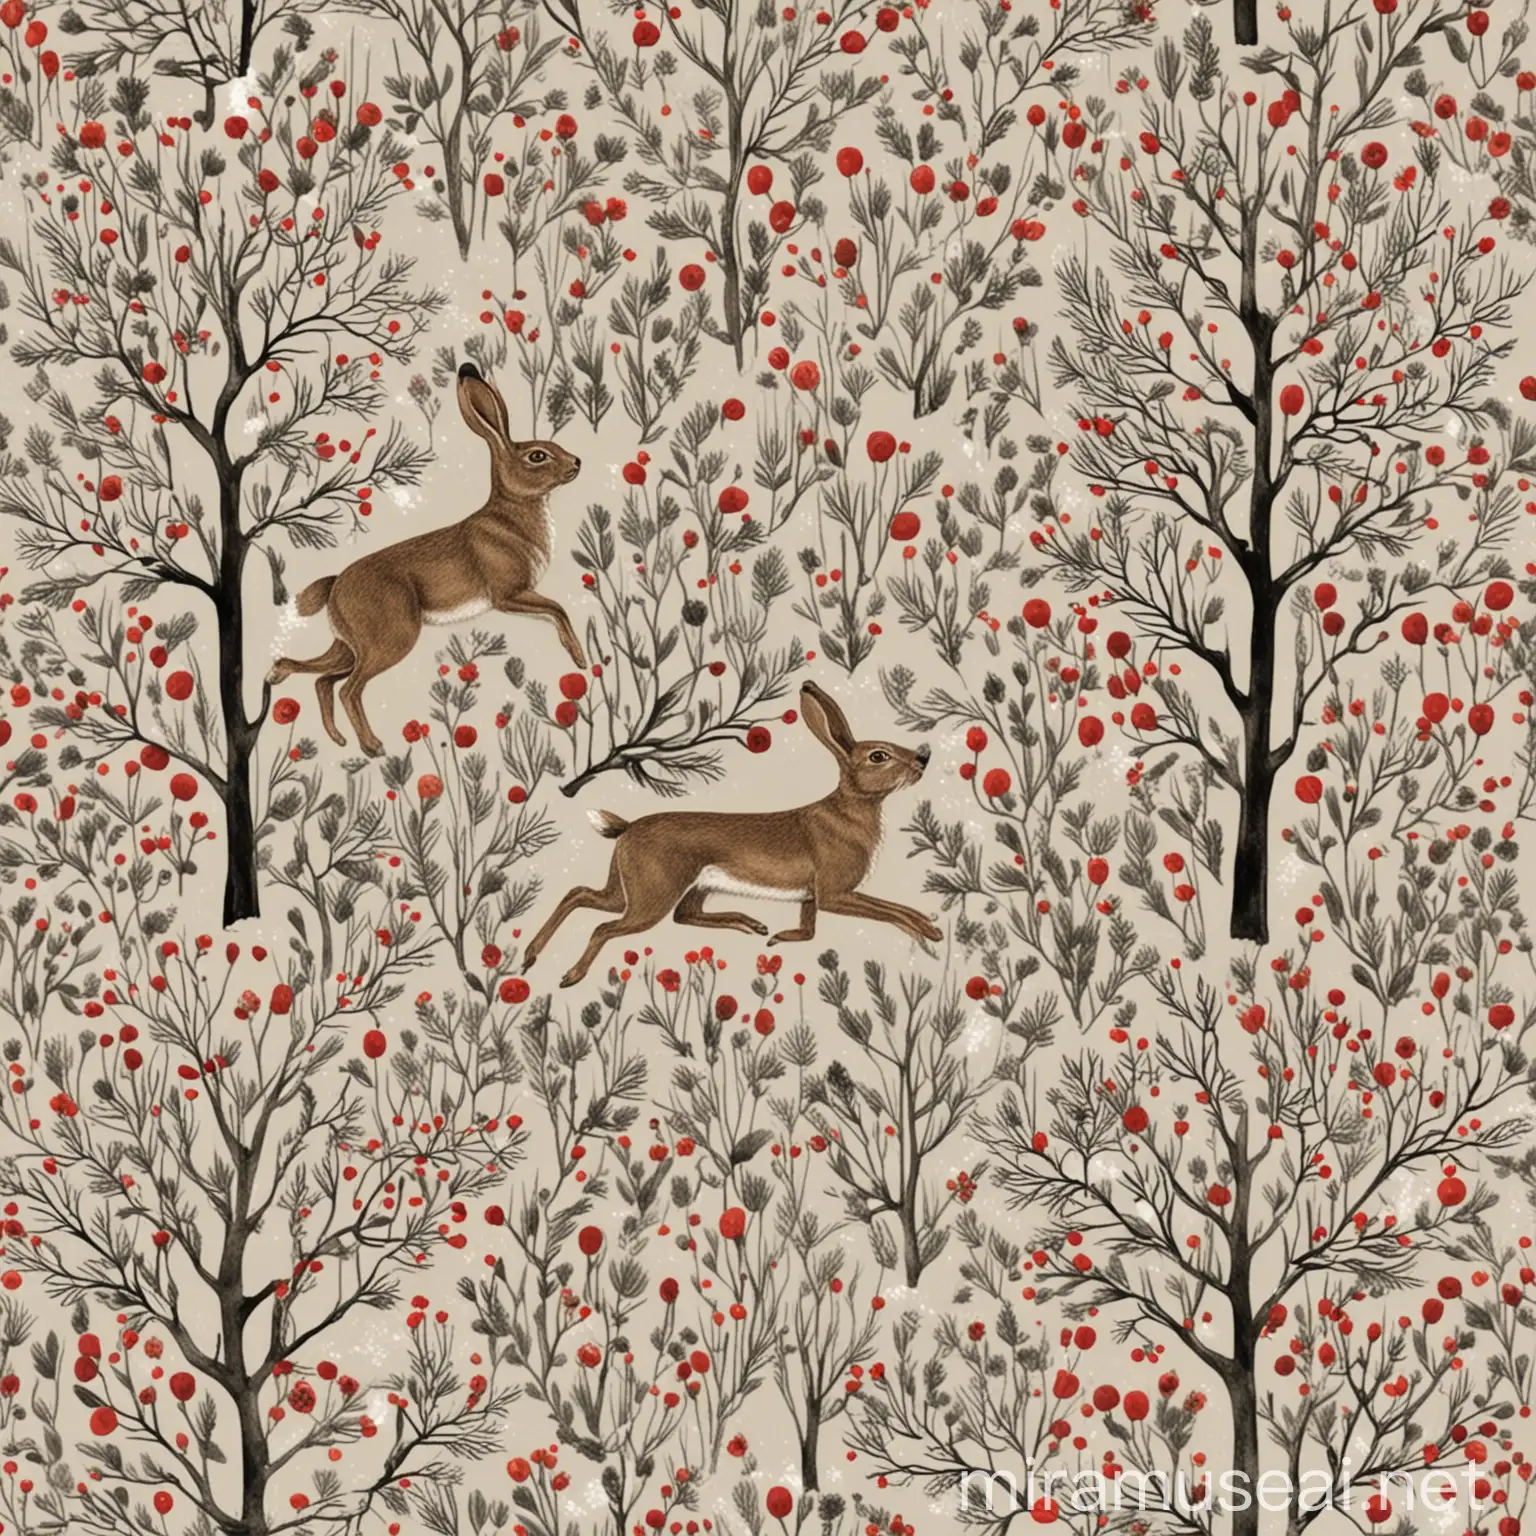 Repeating Hare Pattern on NaturalGrey Base with Snowy Trees and Red Berries